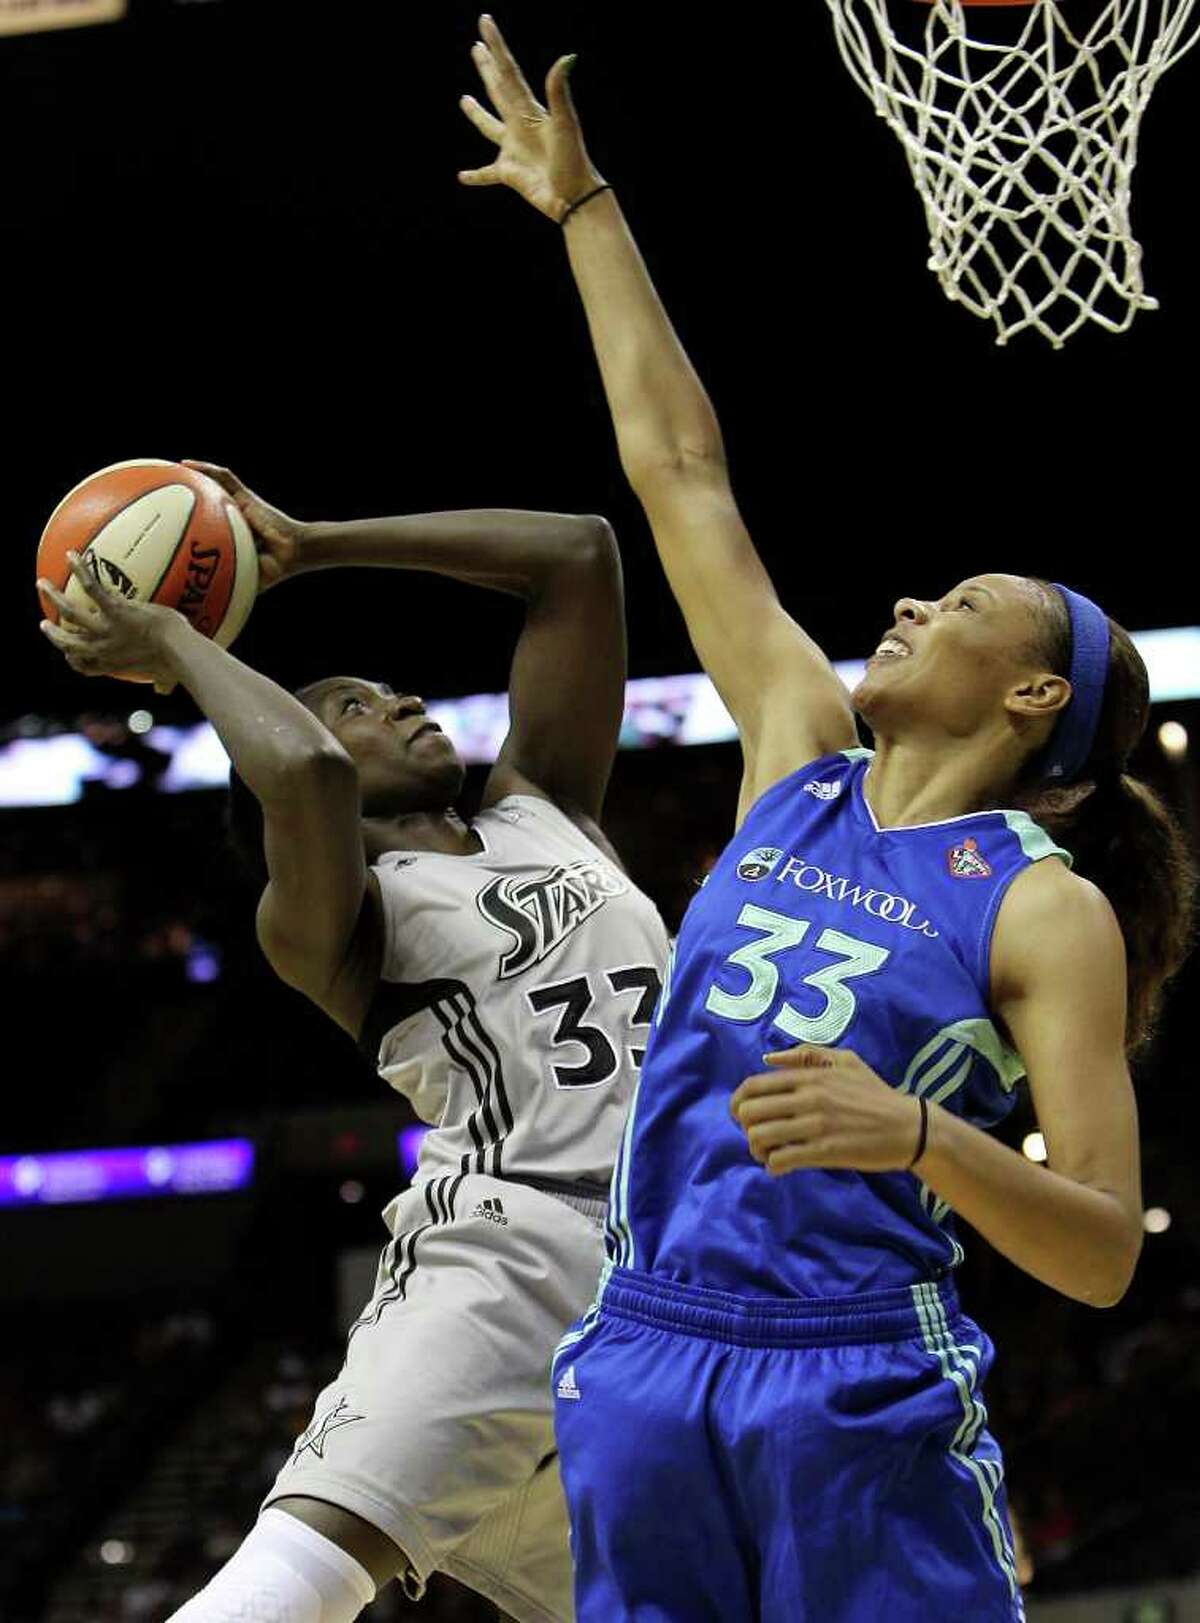 Silver Stars' Sophia Young (left) takes a shot against New York Liberty's Pienetter Pierson (right) in the first half at the AT&T Center on Friday, July 8, 2011. Kin Man Hui/kmhui@express-news.net